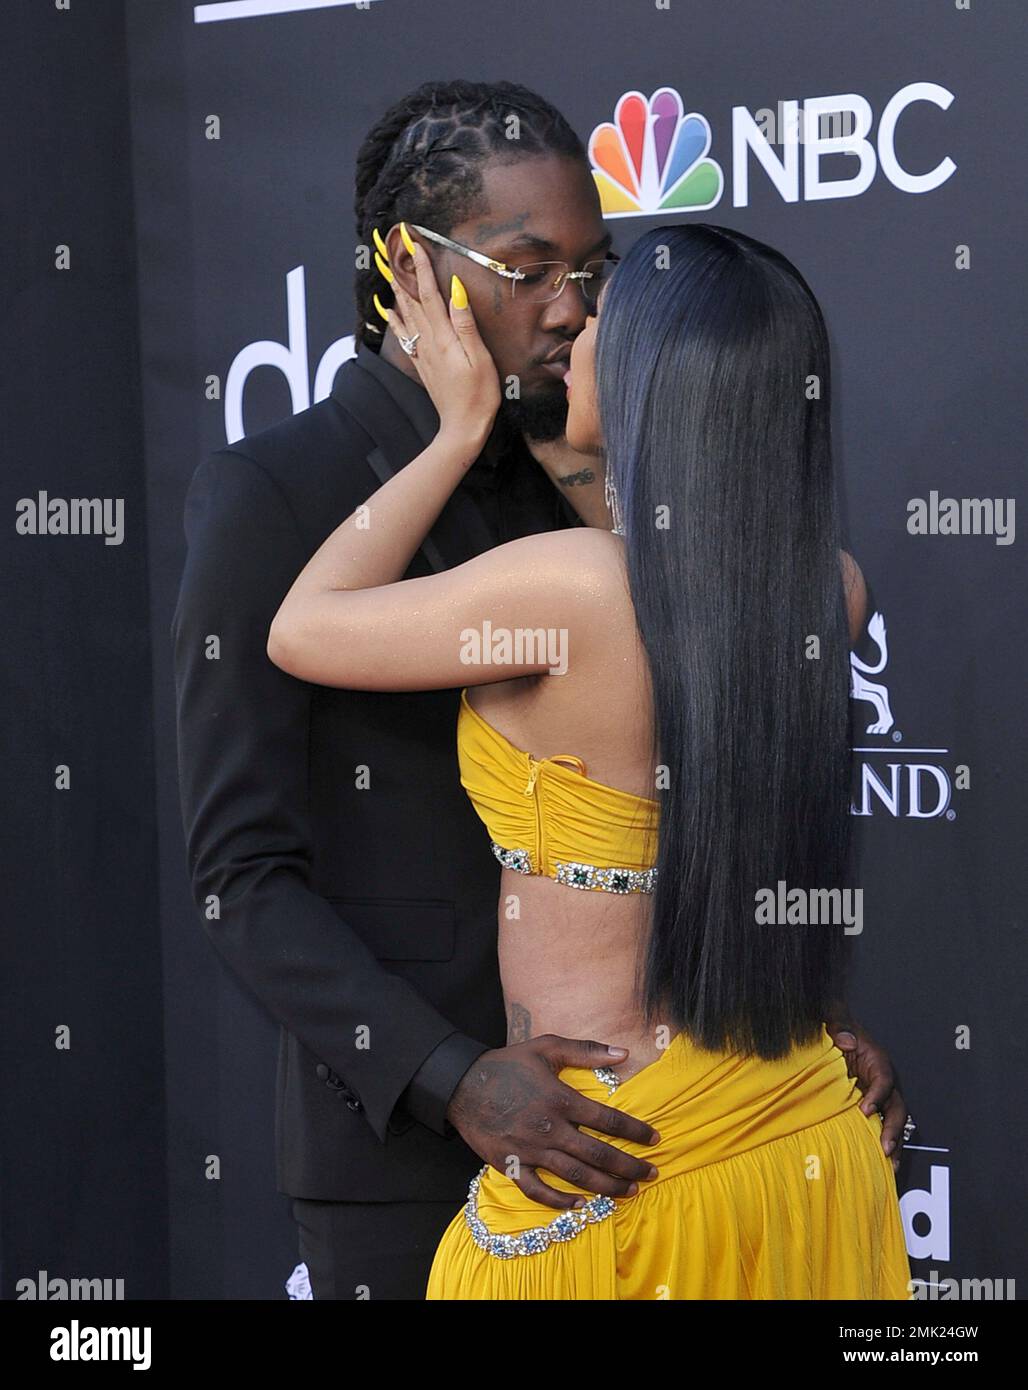 Offset, left, and Cardi B kiss as they arrive at the Billboard Music Awards  on Wednesday, May 1, 2019, at the MGM Grand Garden Arena in Las Vegas.  (Photo by Richard Shotwell/Invision/AP